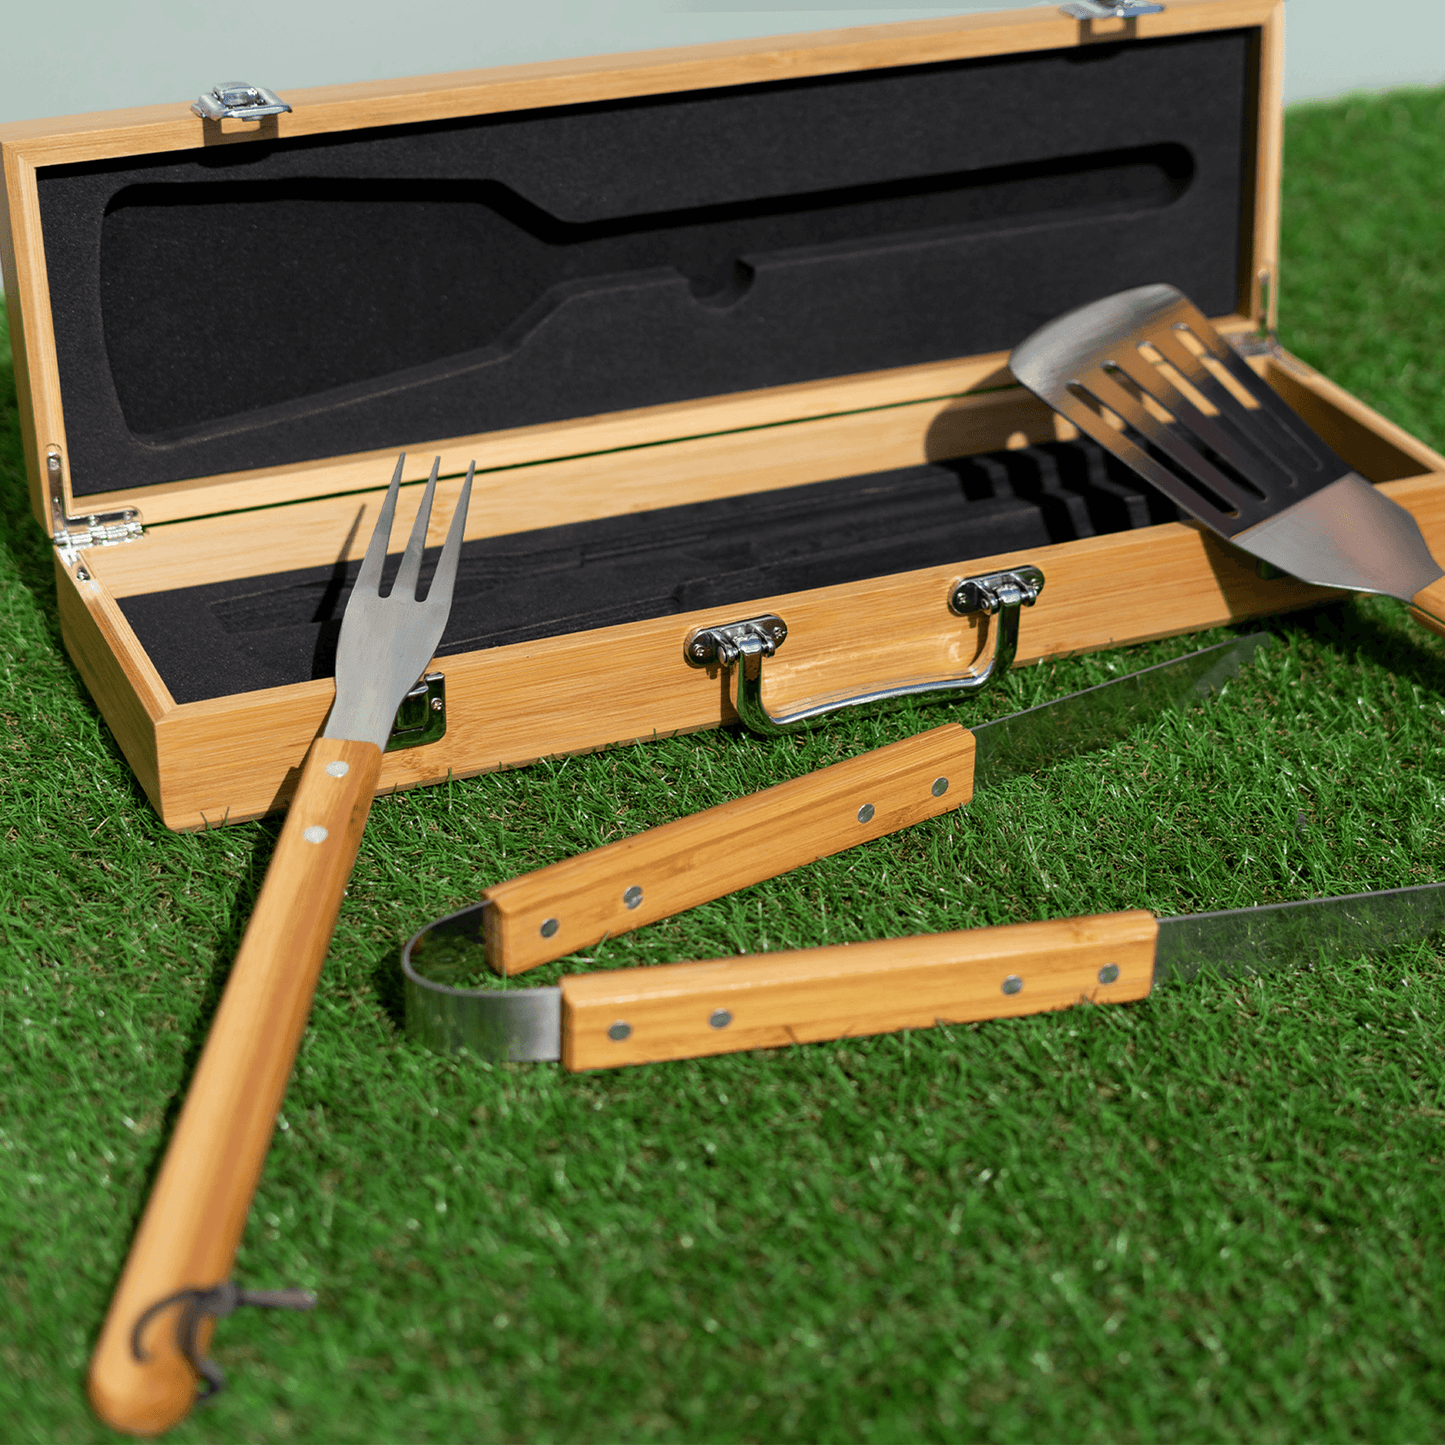 Personalised Engraved Bamboo BBQ Tool Set - So Bespoke Gifts